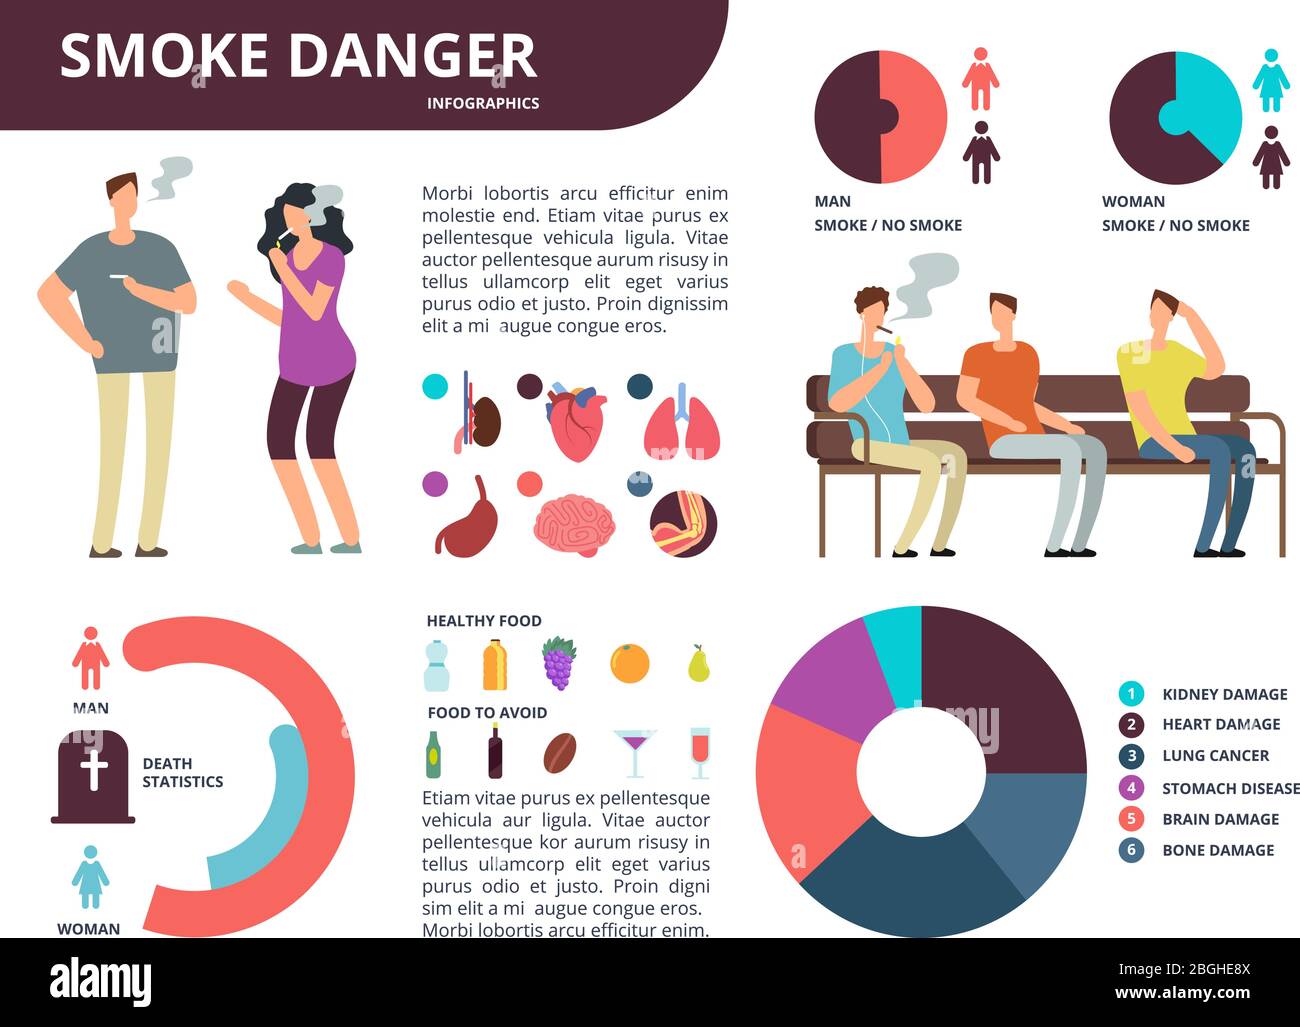 Dangers of smoking vector infographics. Stop smoking vector concept with charts and health icons. Tobacco nicotine infographic, cigarette information harmful illustration Stock Vector